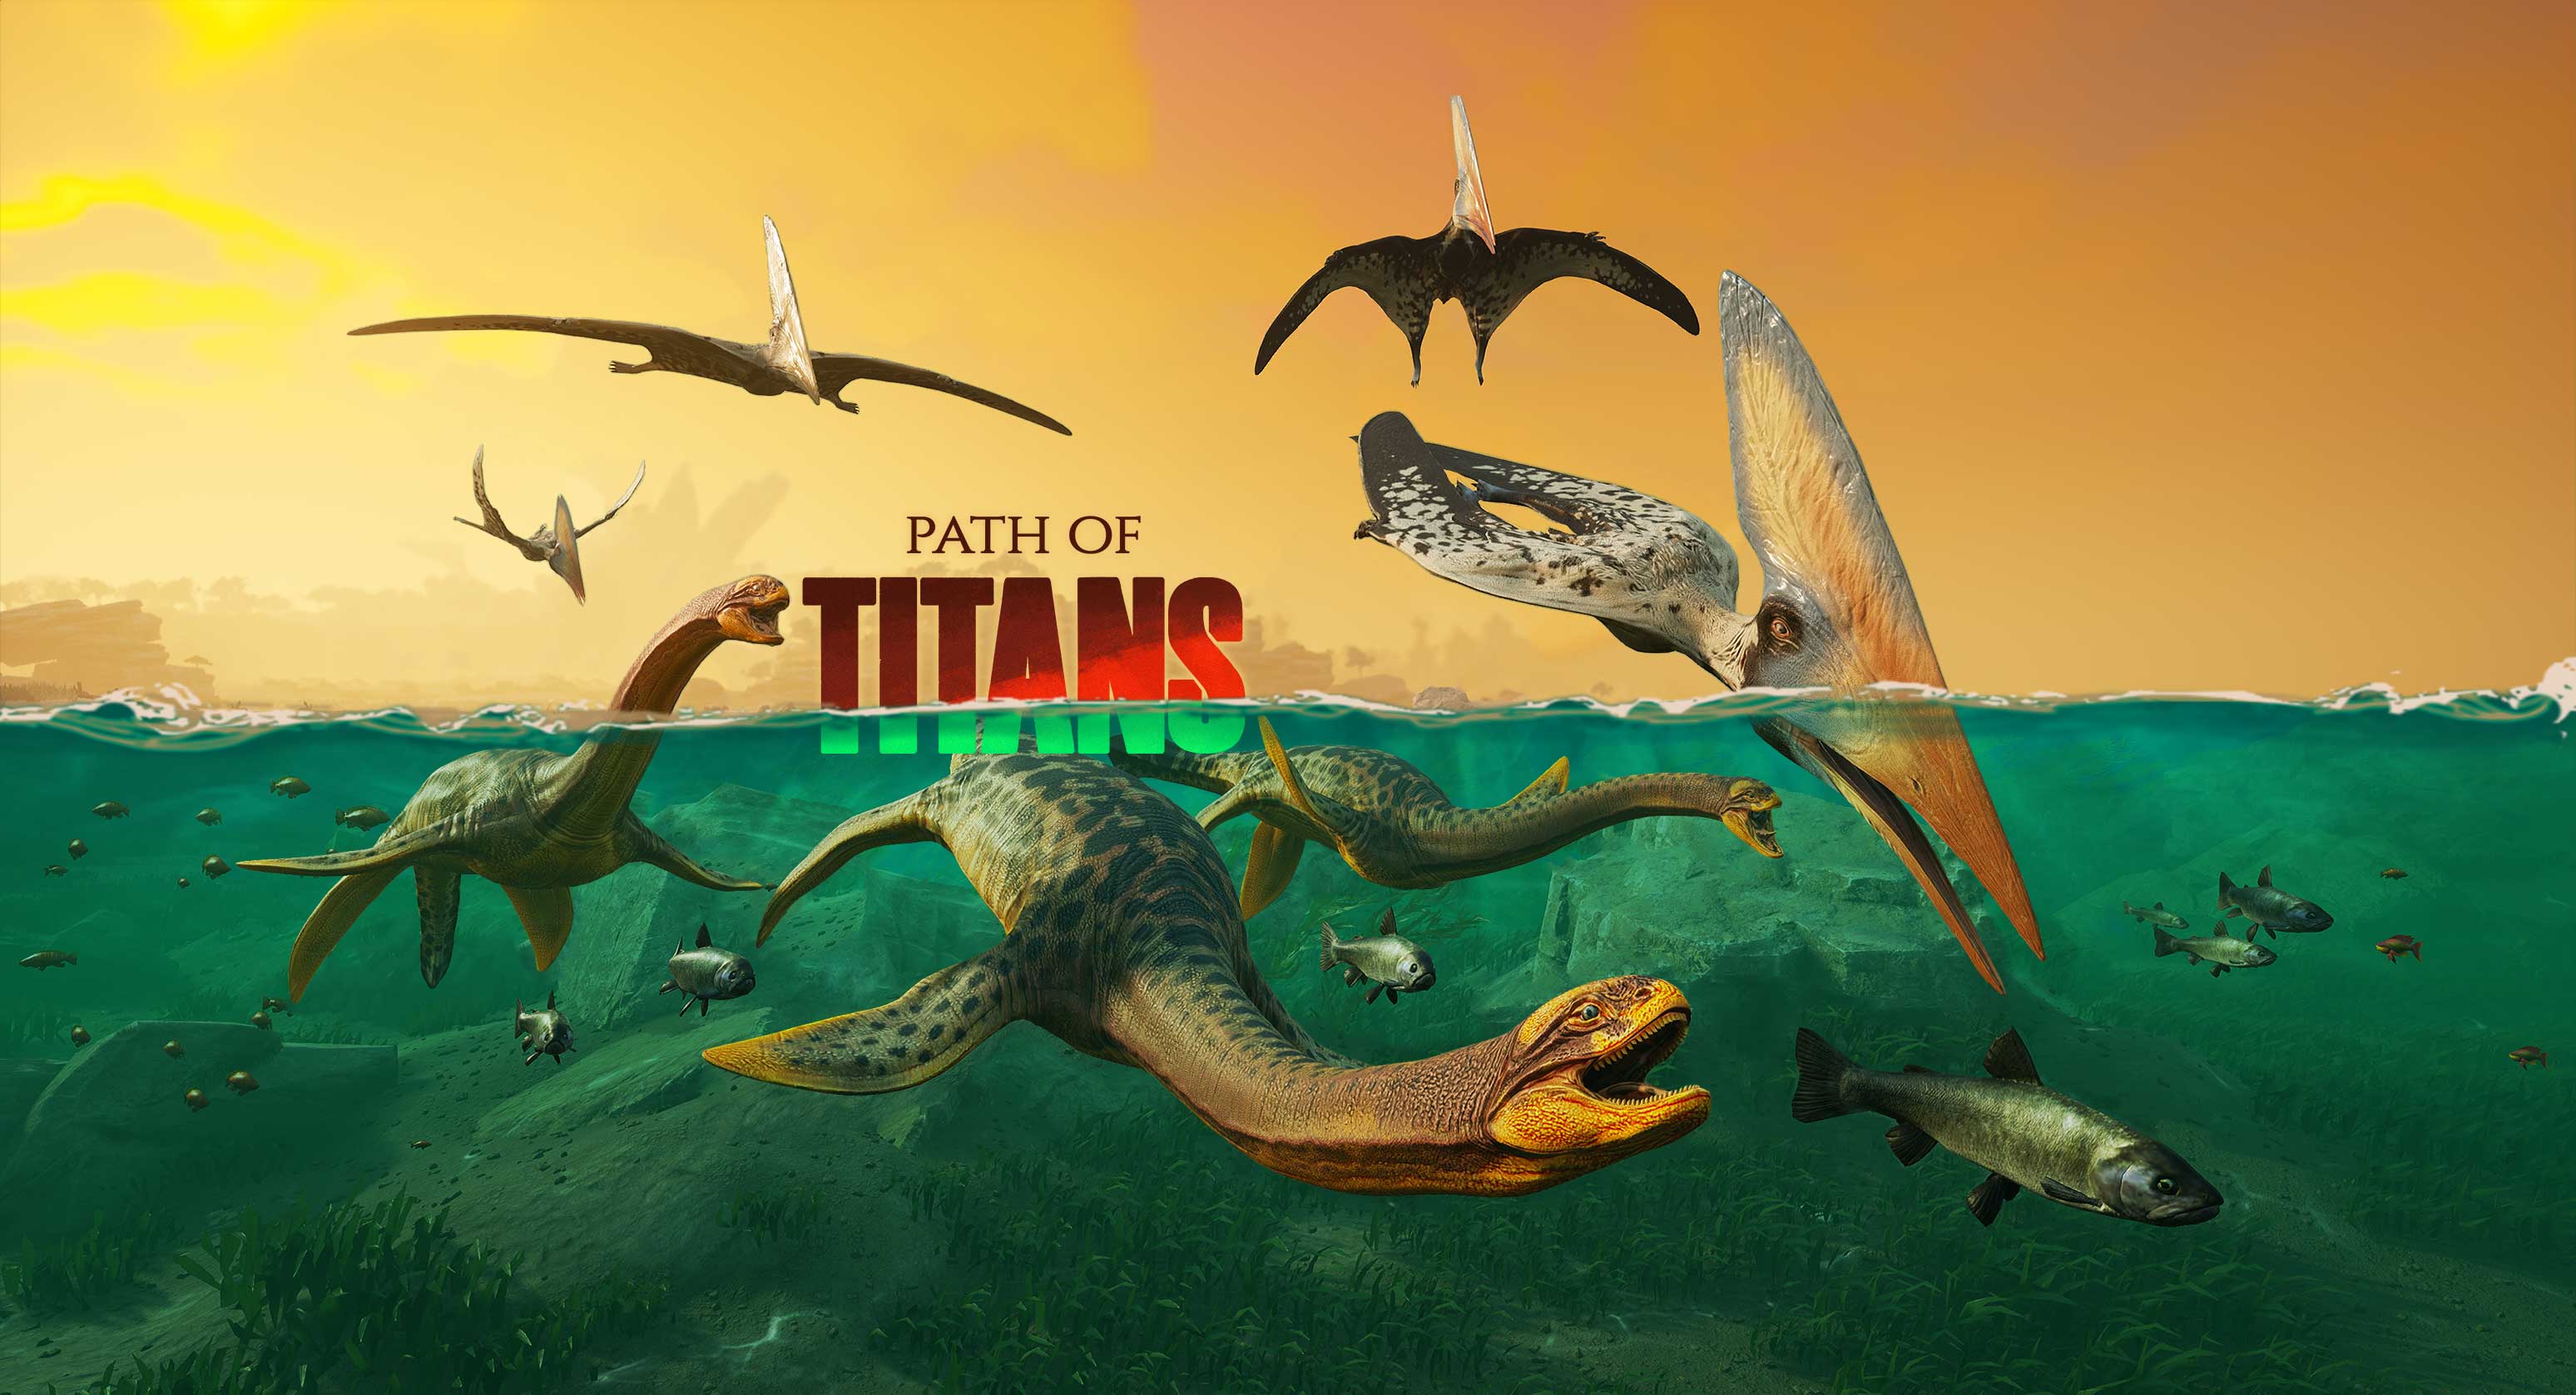 Path of Titans Updates with a New World, First Pterosaurs, and First